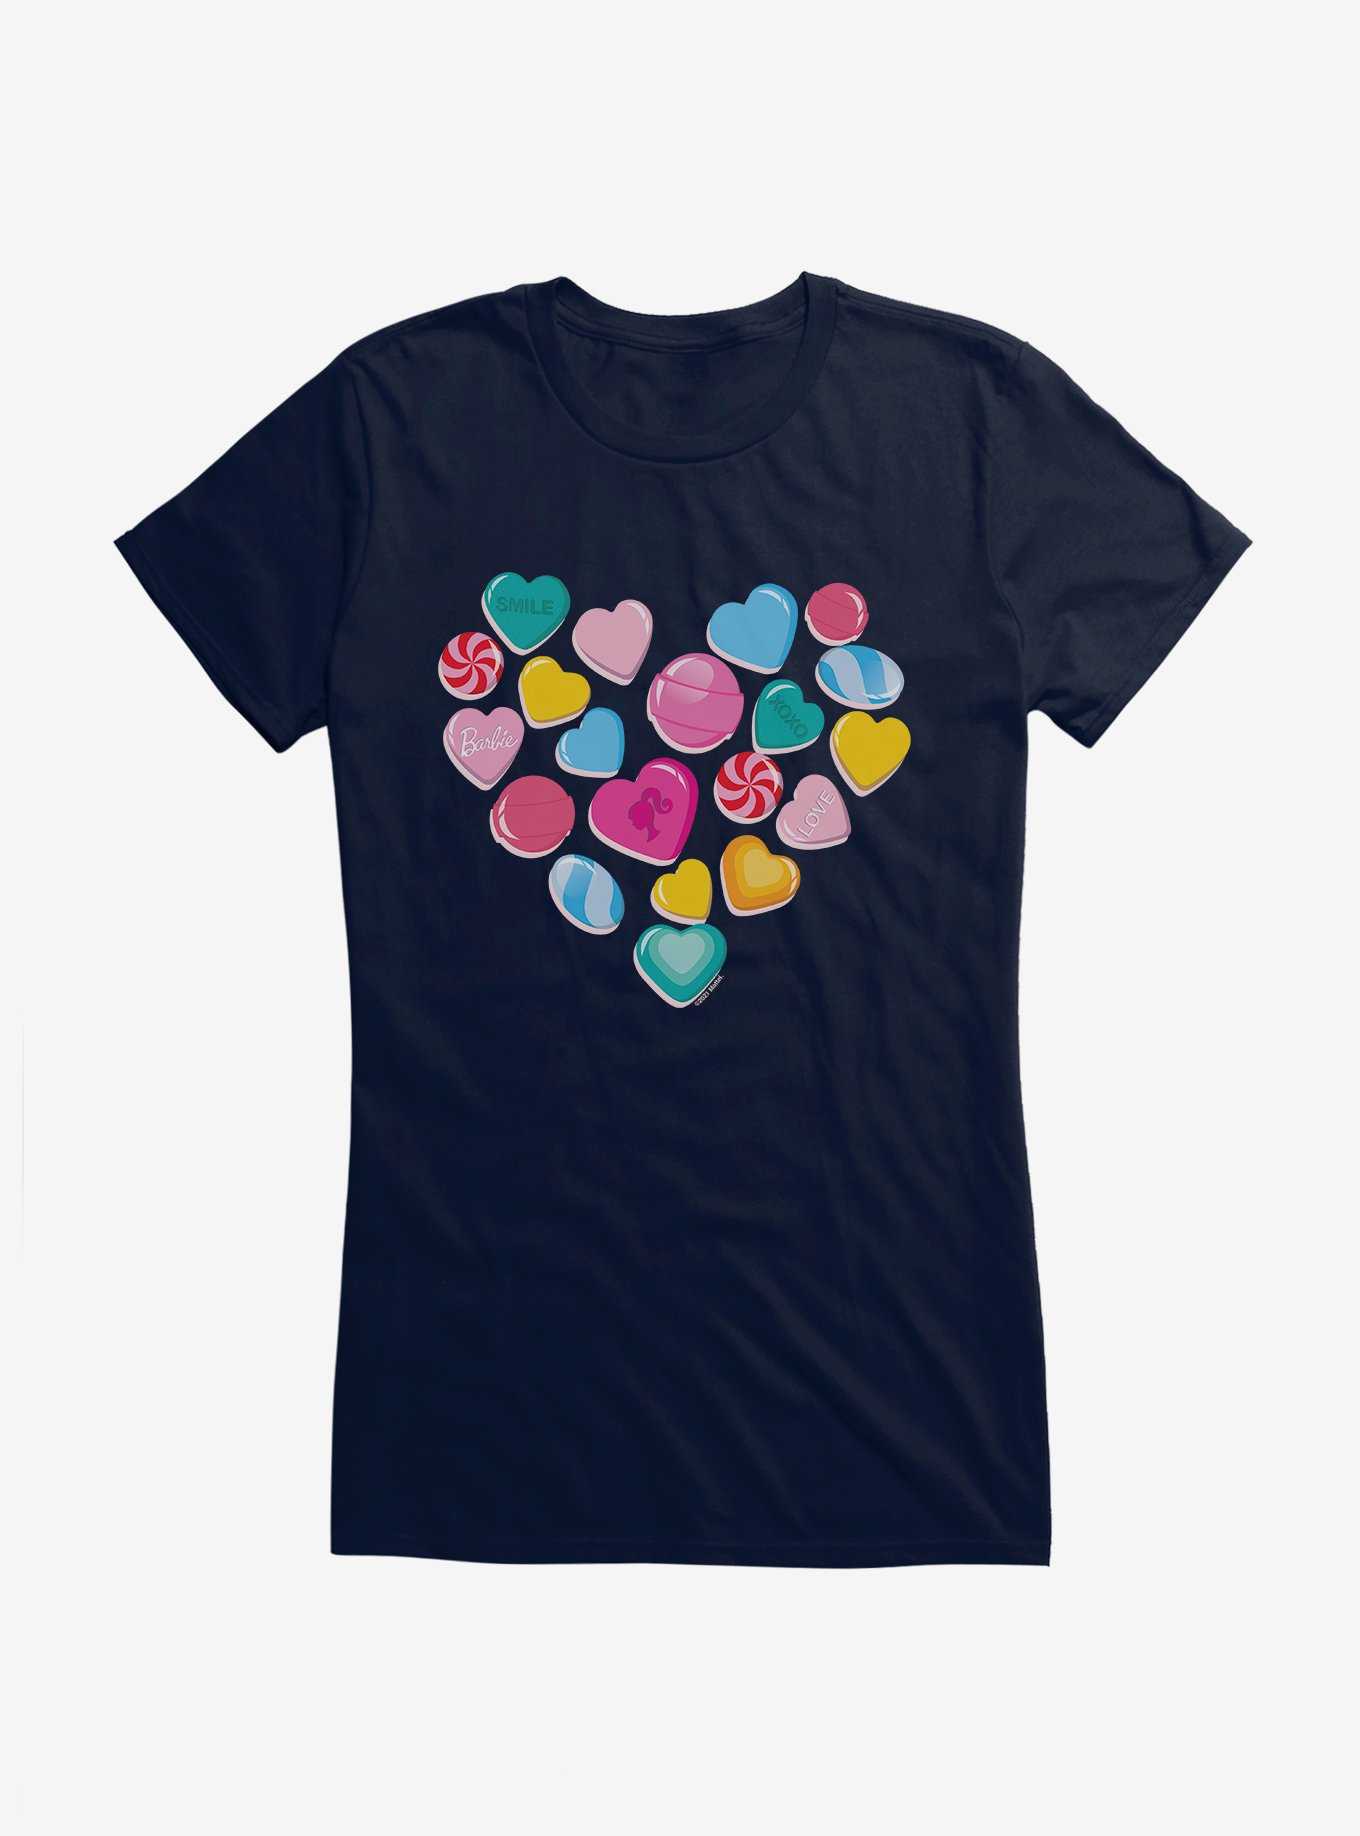 Barbie Valentine's Day Sweets Girls T-Shirt, NAVY, hi-res